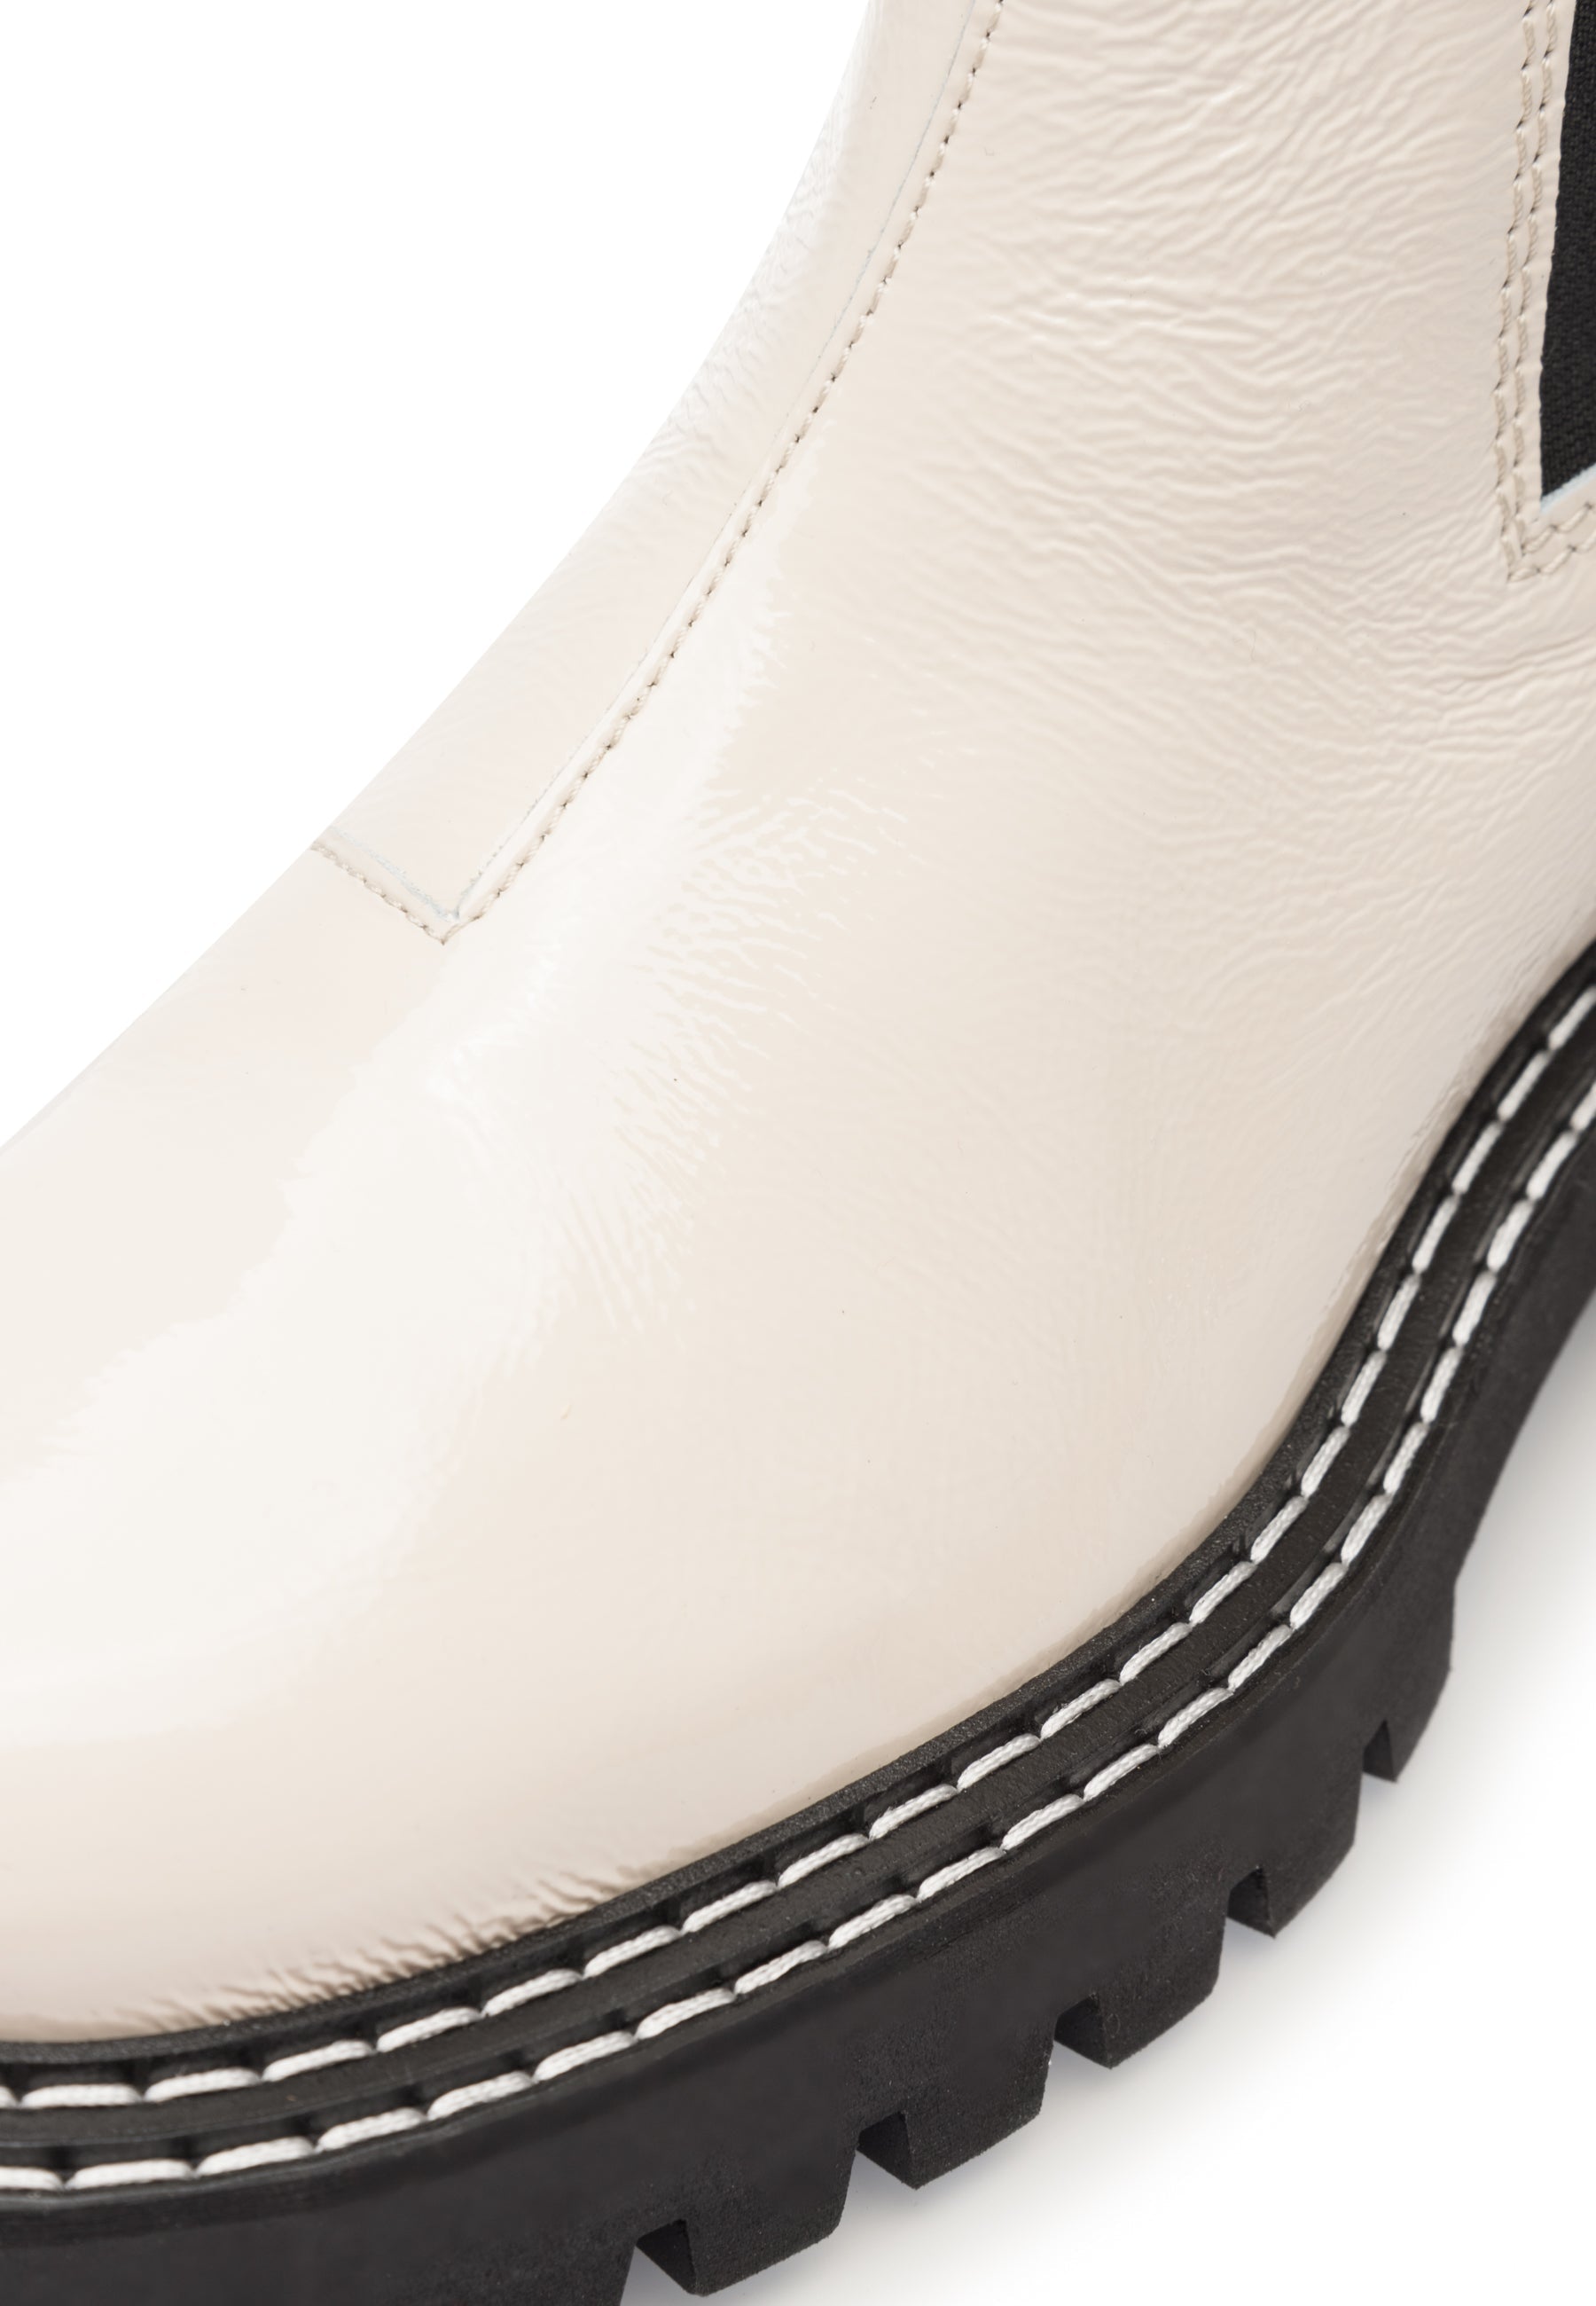 Daze Off White Patent Leather Chelsea Boots LAST1678 - 5